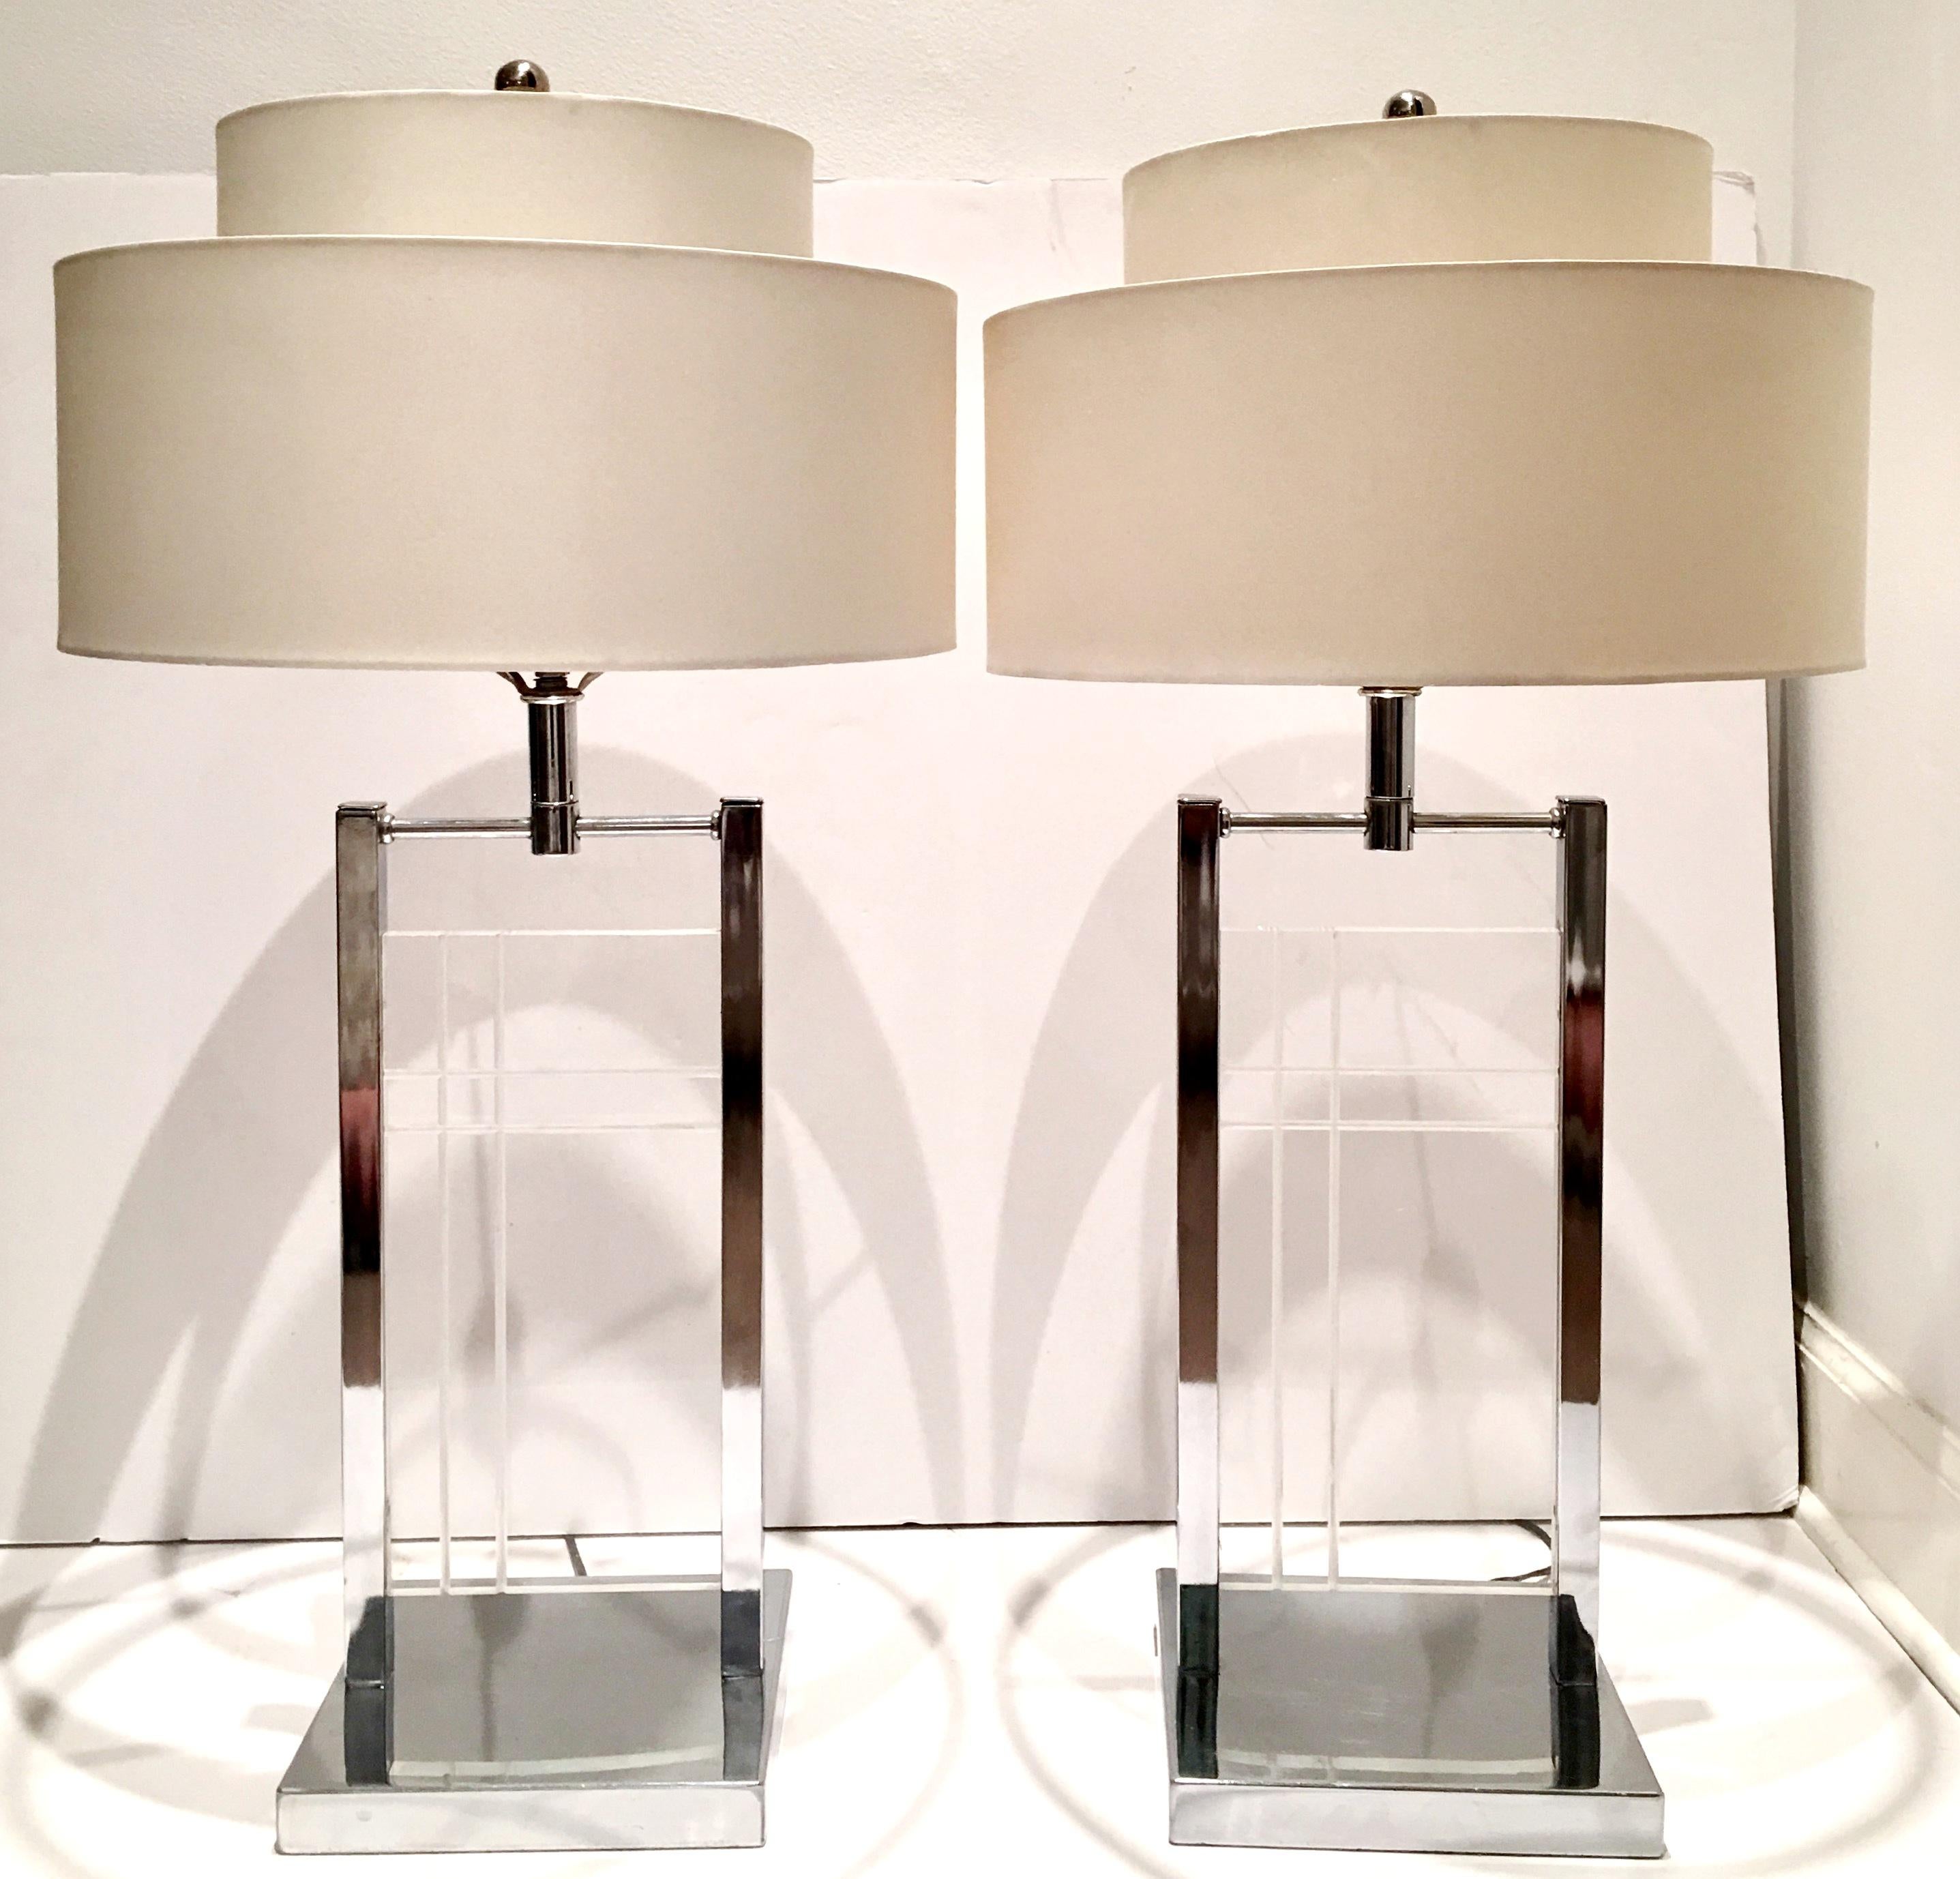 1970'S Modern & Timeless Etched Lucite Panel & Chrome Pair Of Lamps By, George Kovacs. Features a geometric clean line etched motif on Lucite slab panel with chrome fittings. The Lucite panel measures, 13